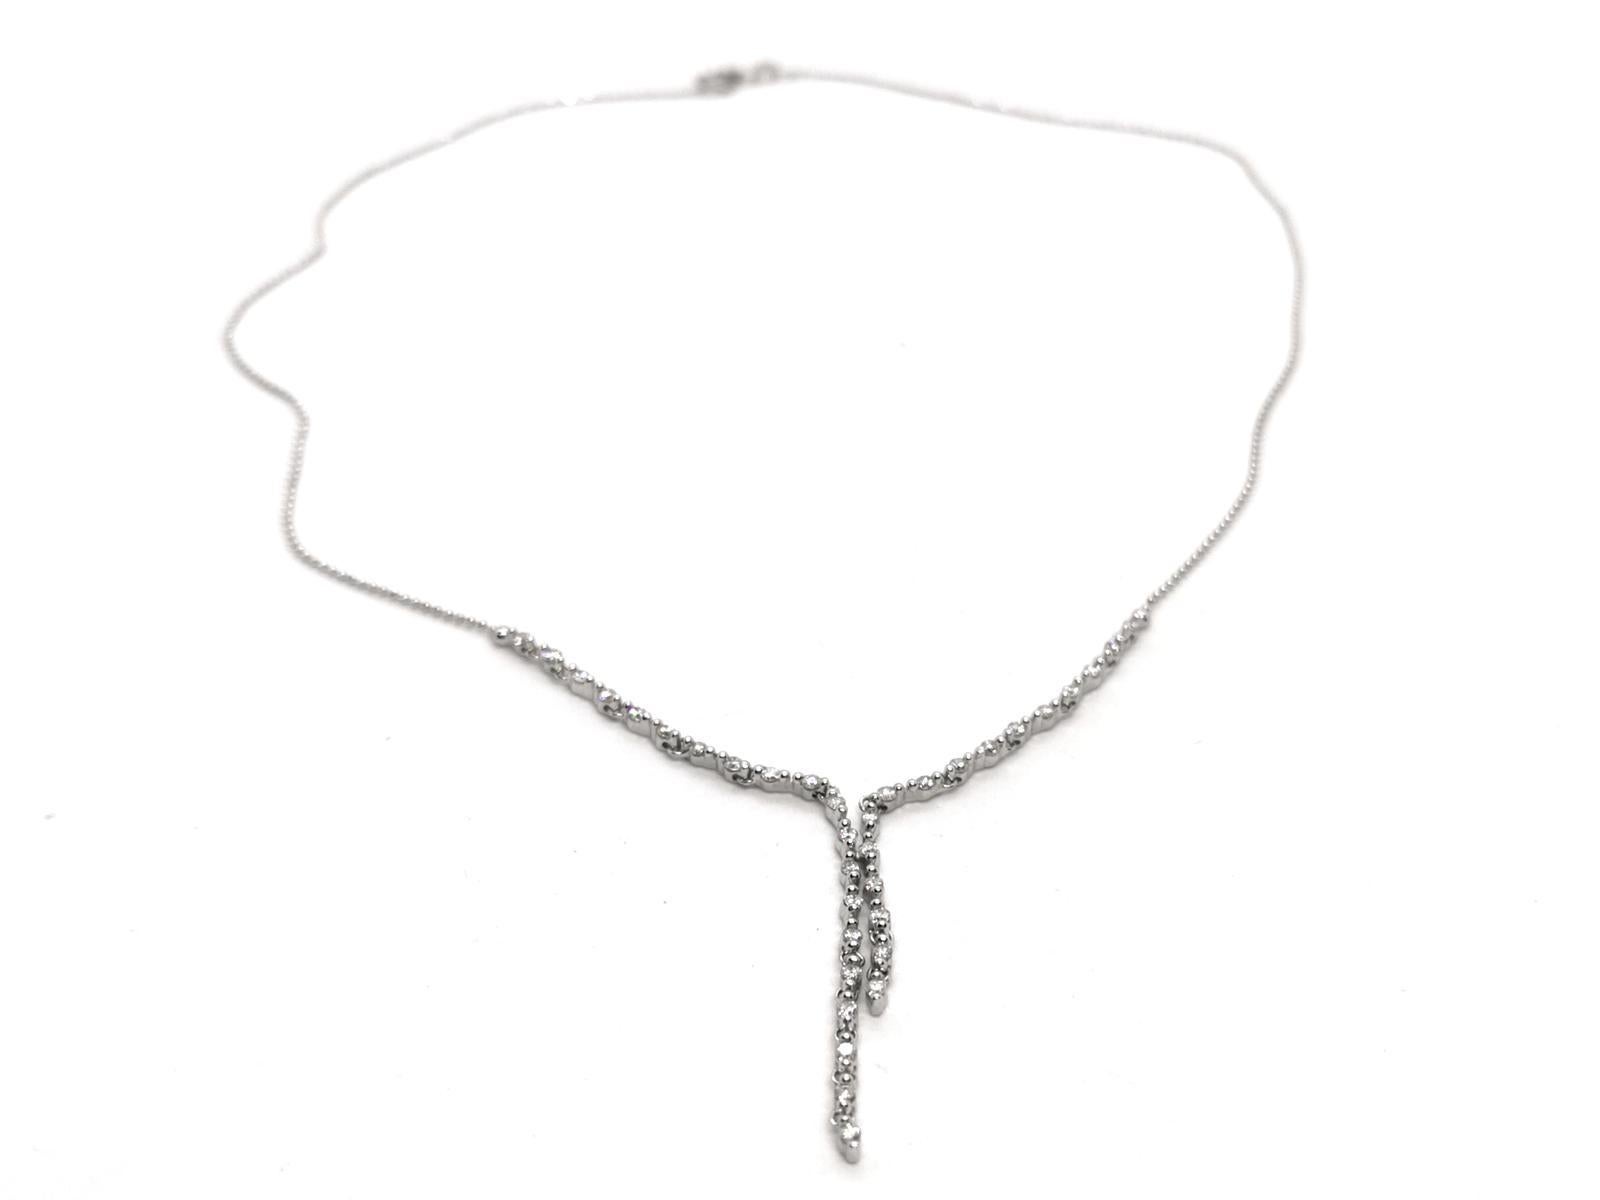 Necklace white gold 750 thousandths (18 carats). semi rigid. composed of 36 diamonds of 0.015 carat. unit set half closed-claws distributed over two rows of different lengths.  length: 40 cm. total weight 5.26g. excellent condition
